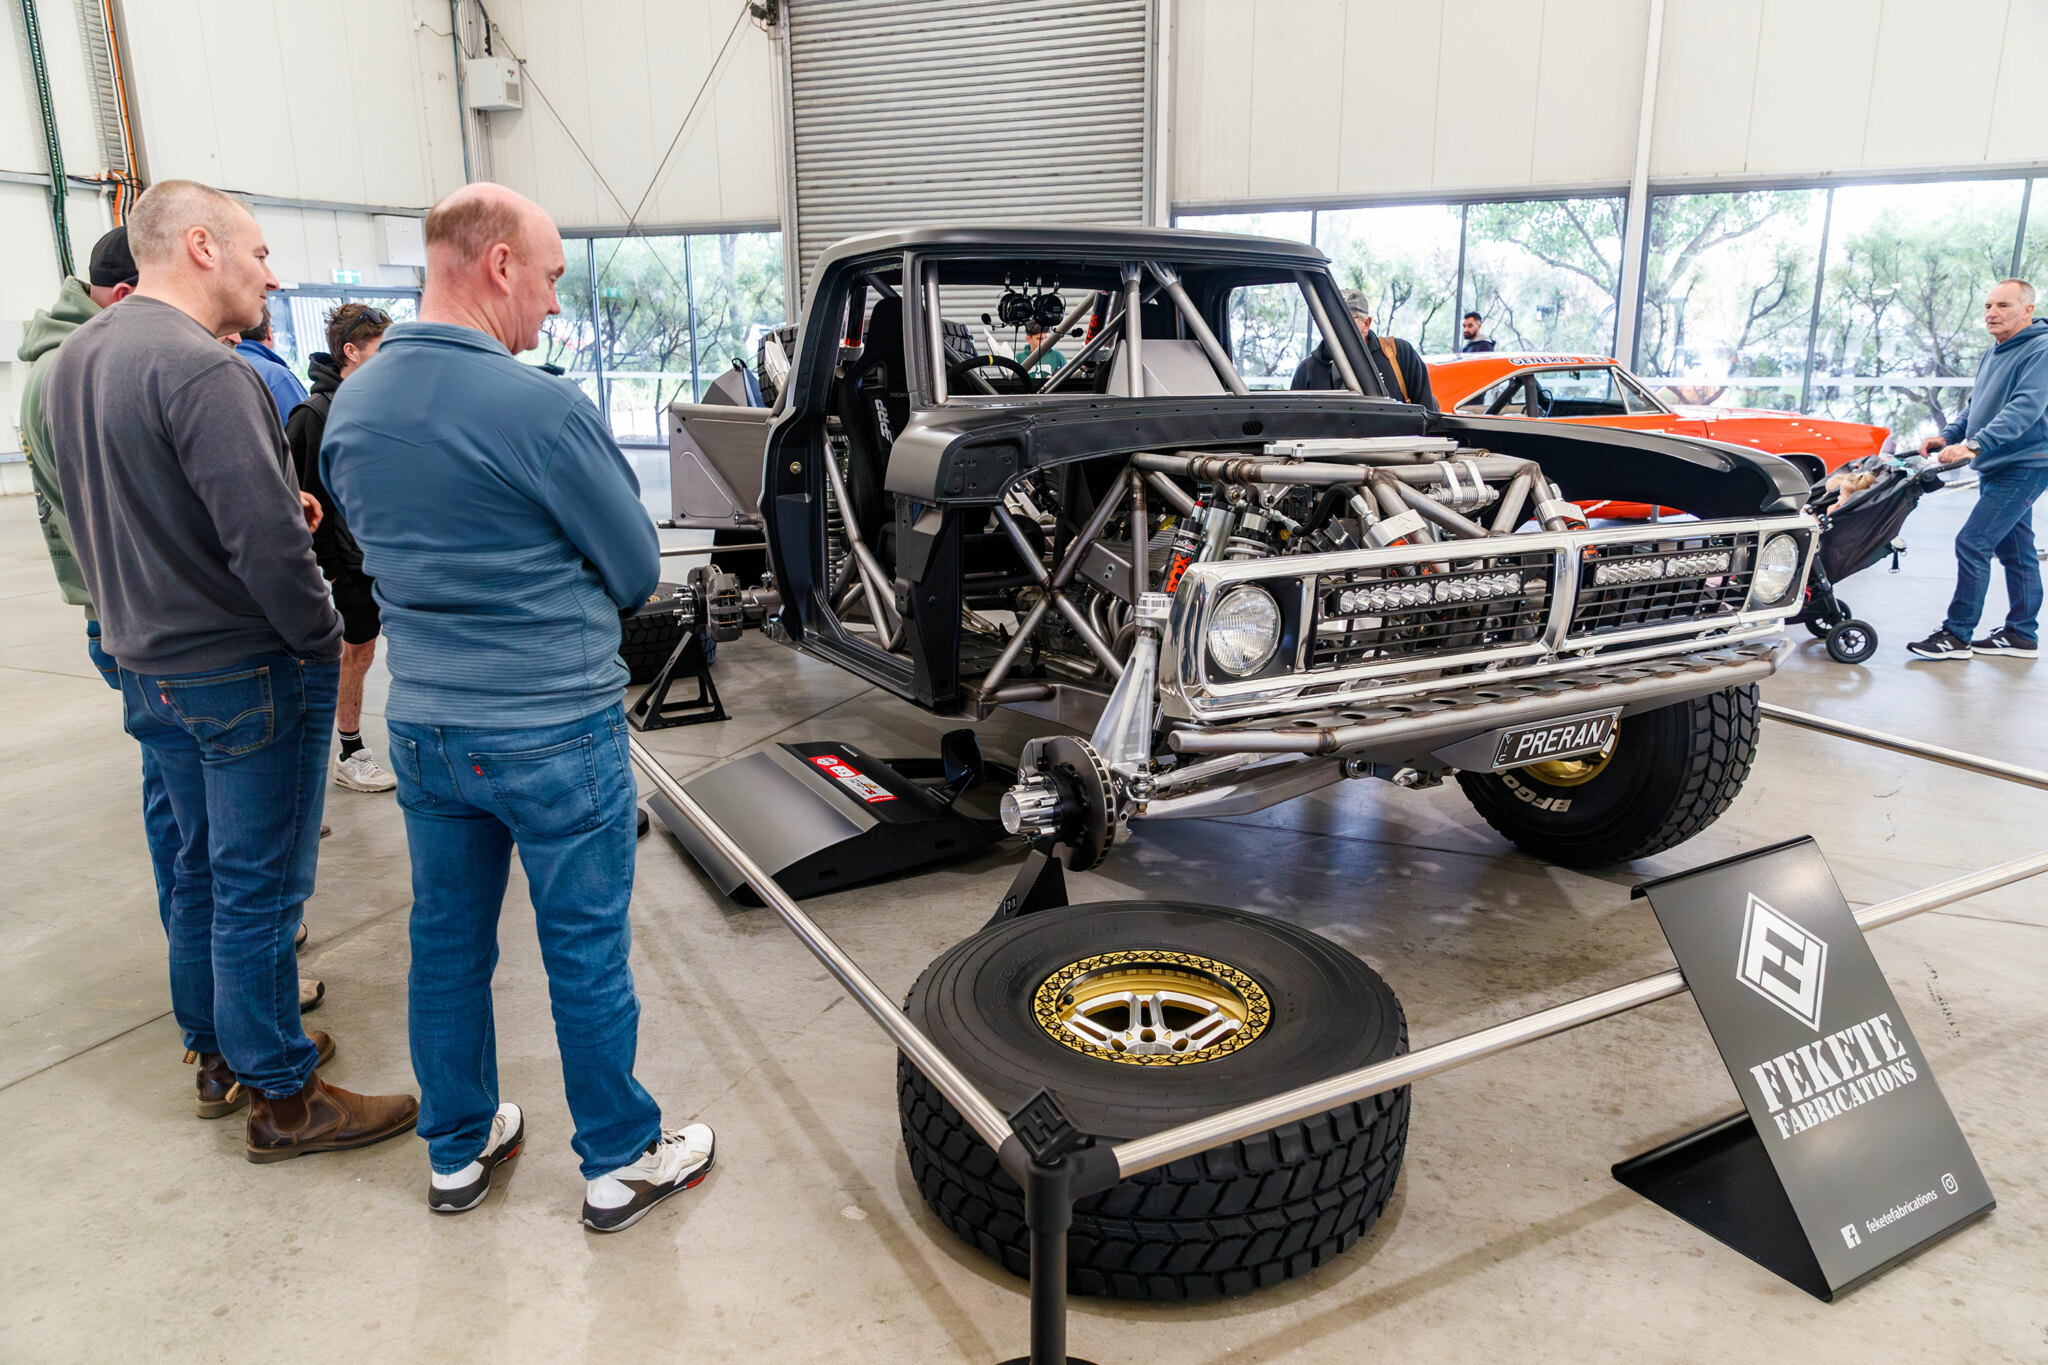 Blown Coyote-powered Ford F100 pre-runner in the build